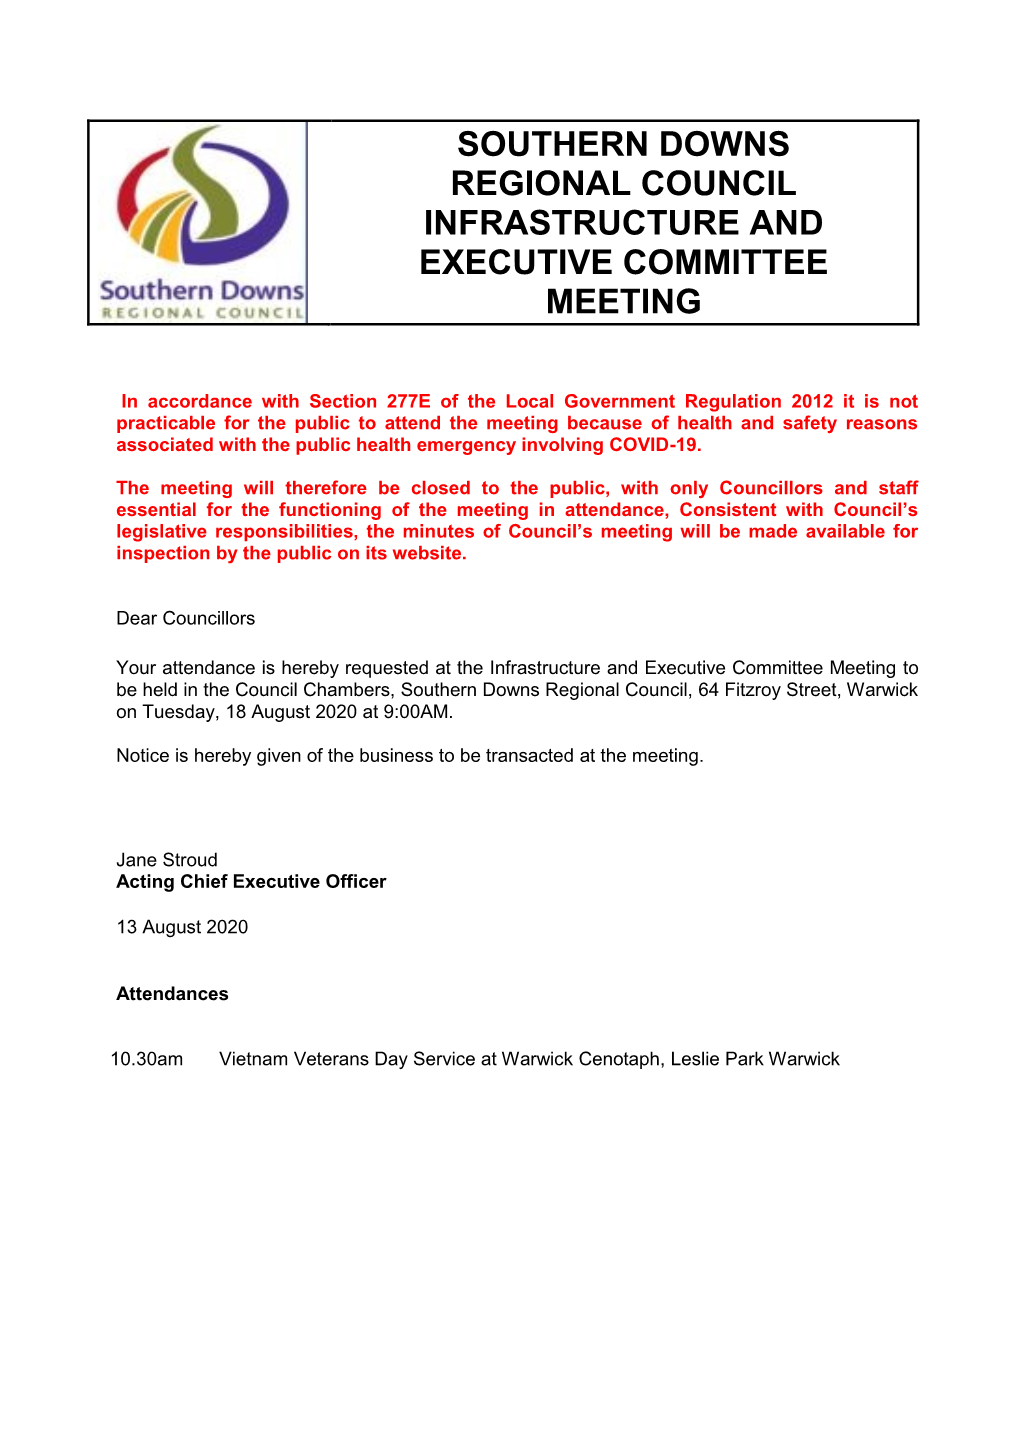 Agenda of Infrastructure and Executive Committee Meeting